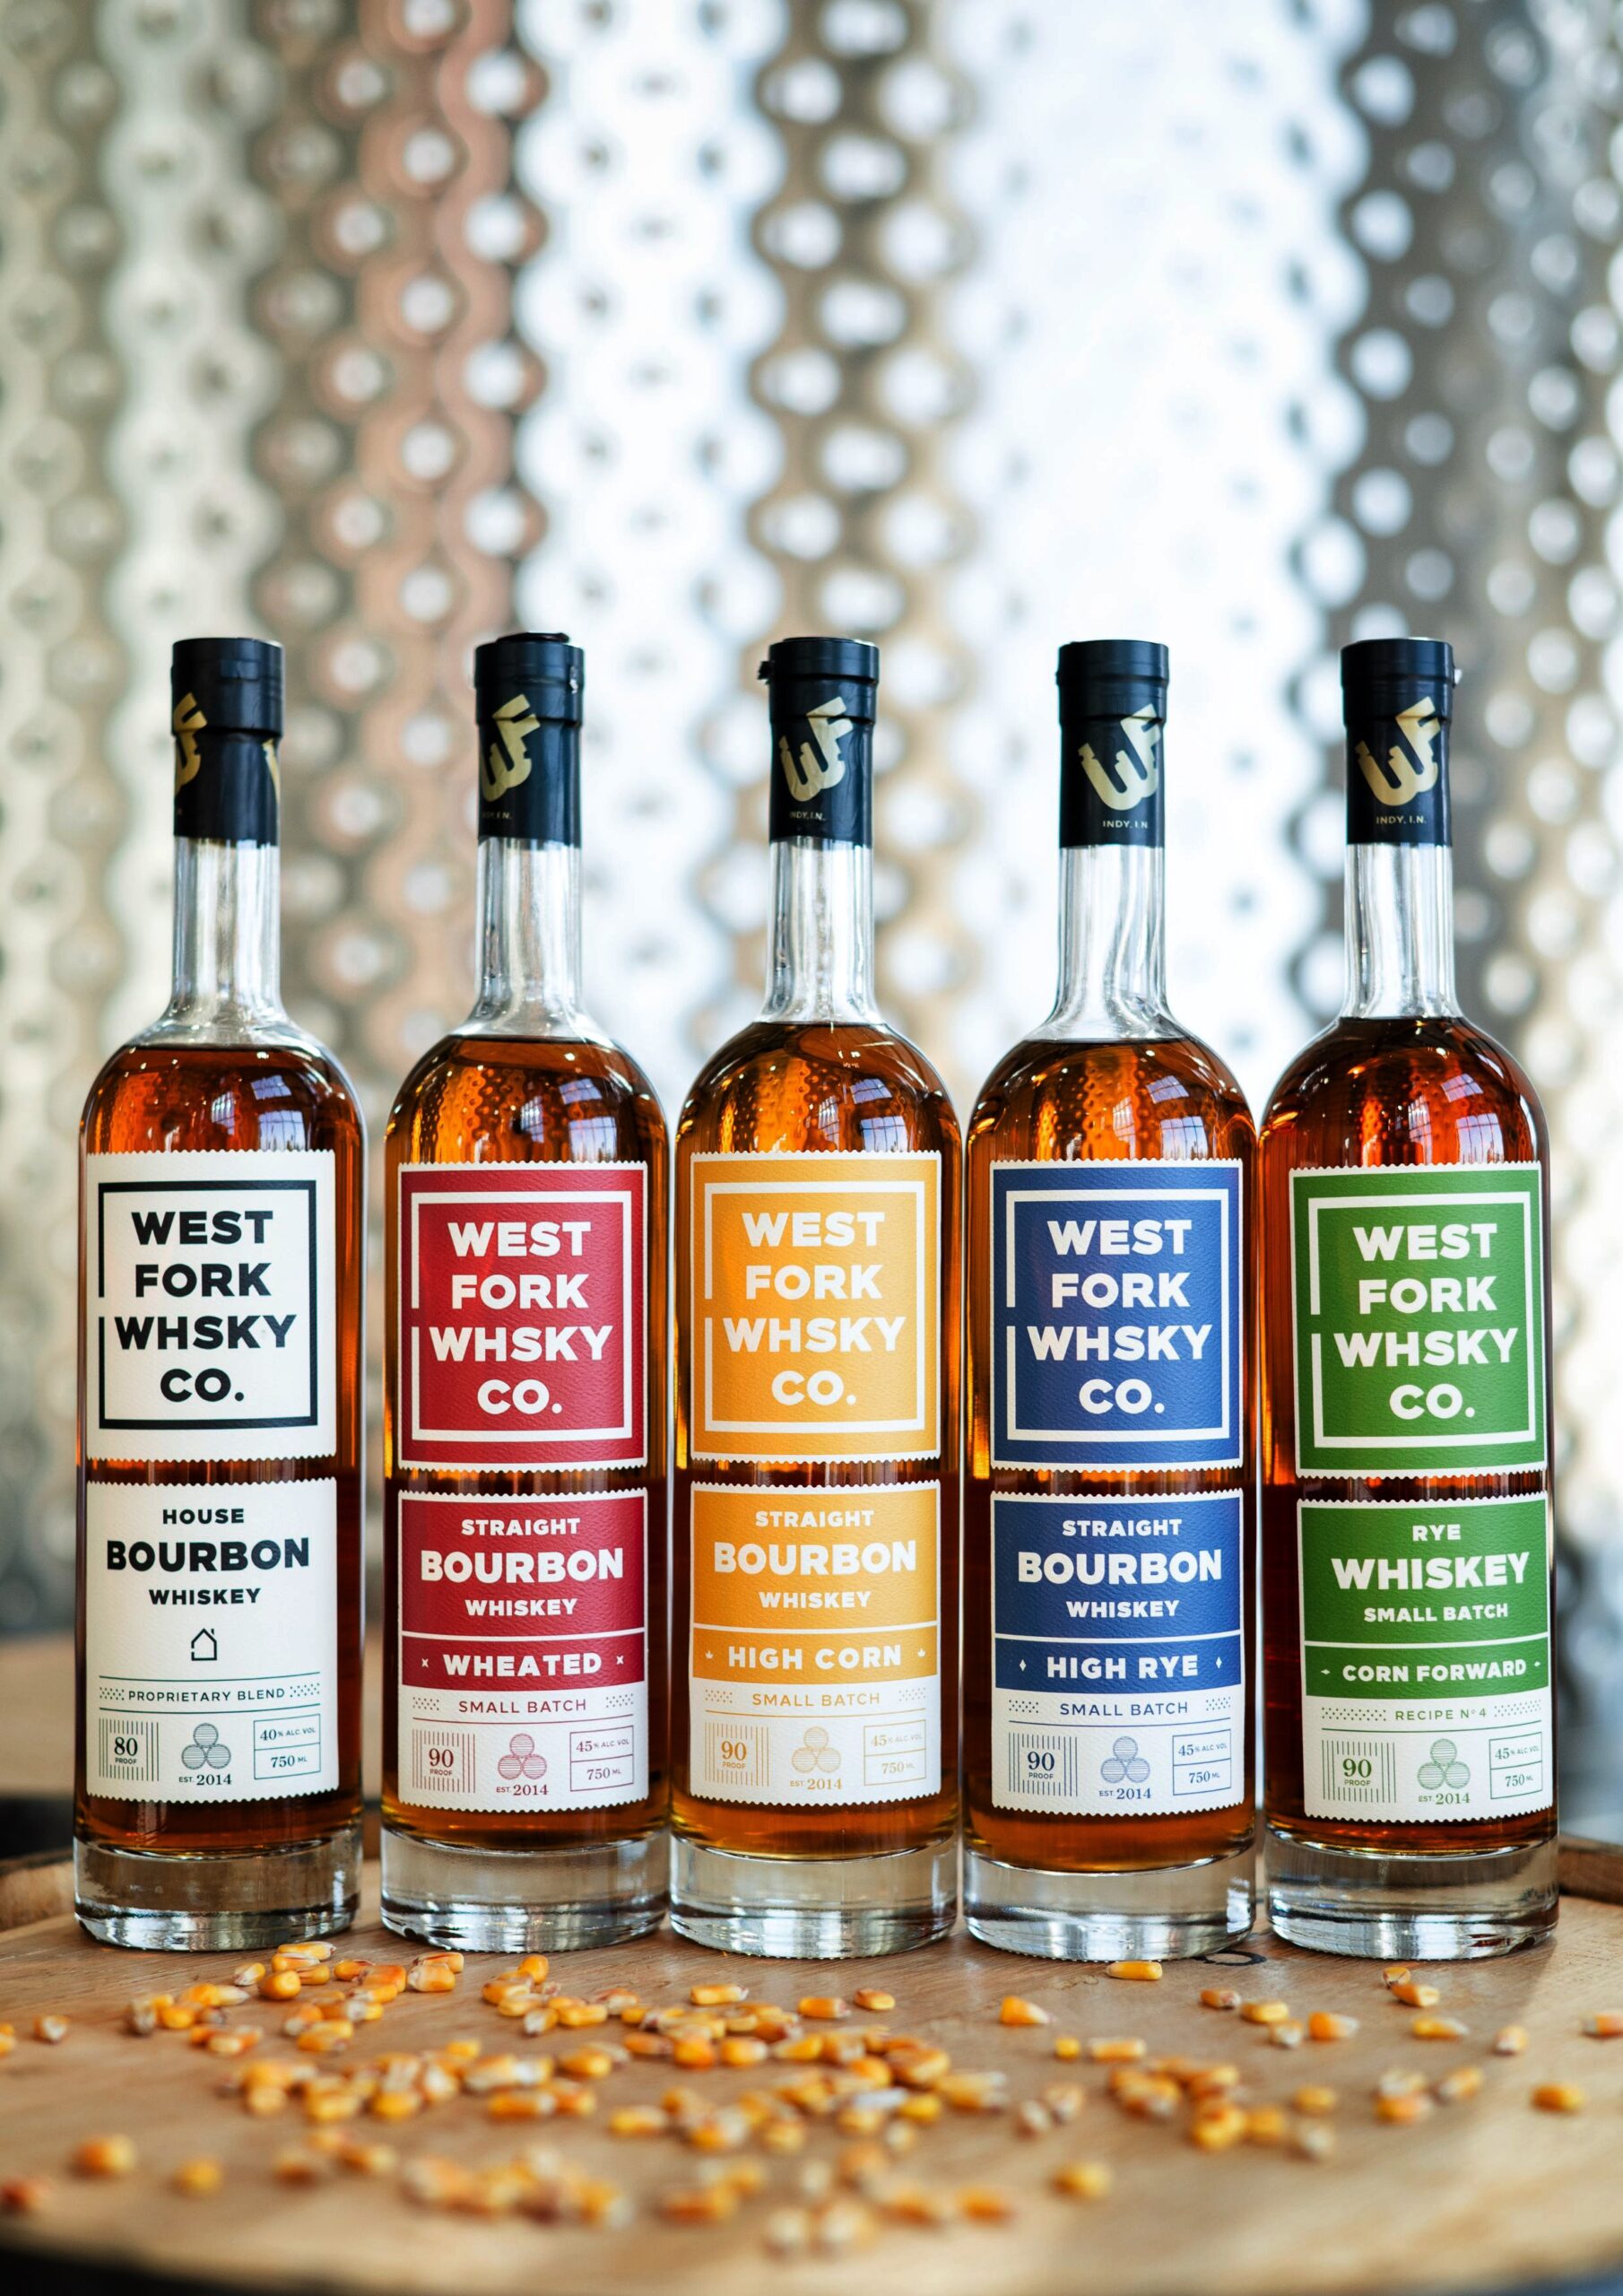 West Fork Whiskey Co.  Secures New Investment to Accelerate Growth